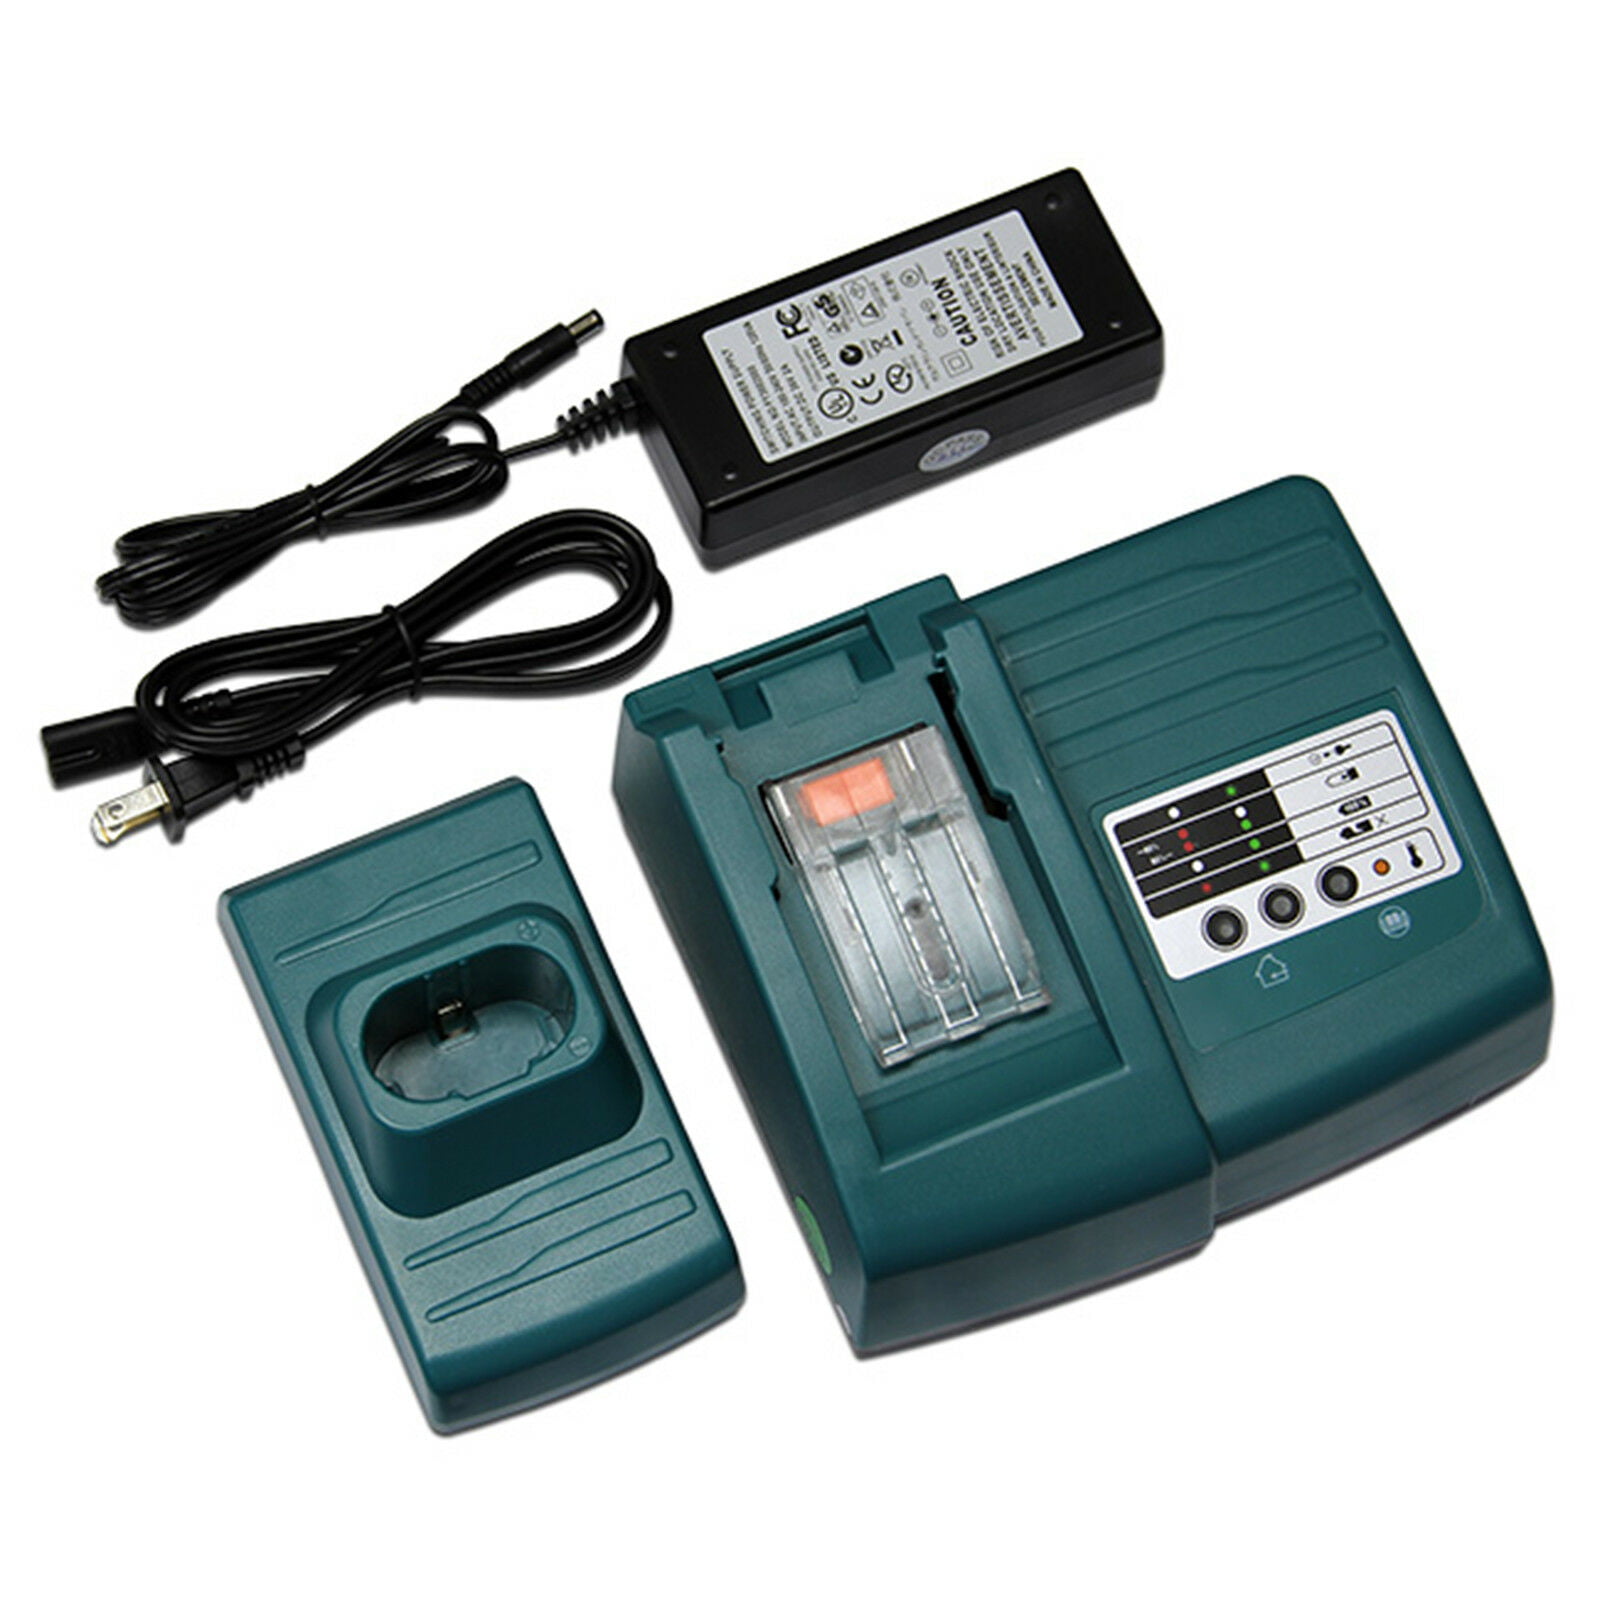 ignorance Situation Wish MaximalPower Replacement Charger for Makita DC18RA DC18SC DC1803 DC1804  DC14SA 7.2V-18V Ni-CD/Ni-MH and Makita BL1430 BL1830 14.4V and 18V Li-ion -  Walmart.com